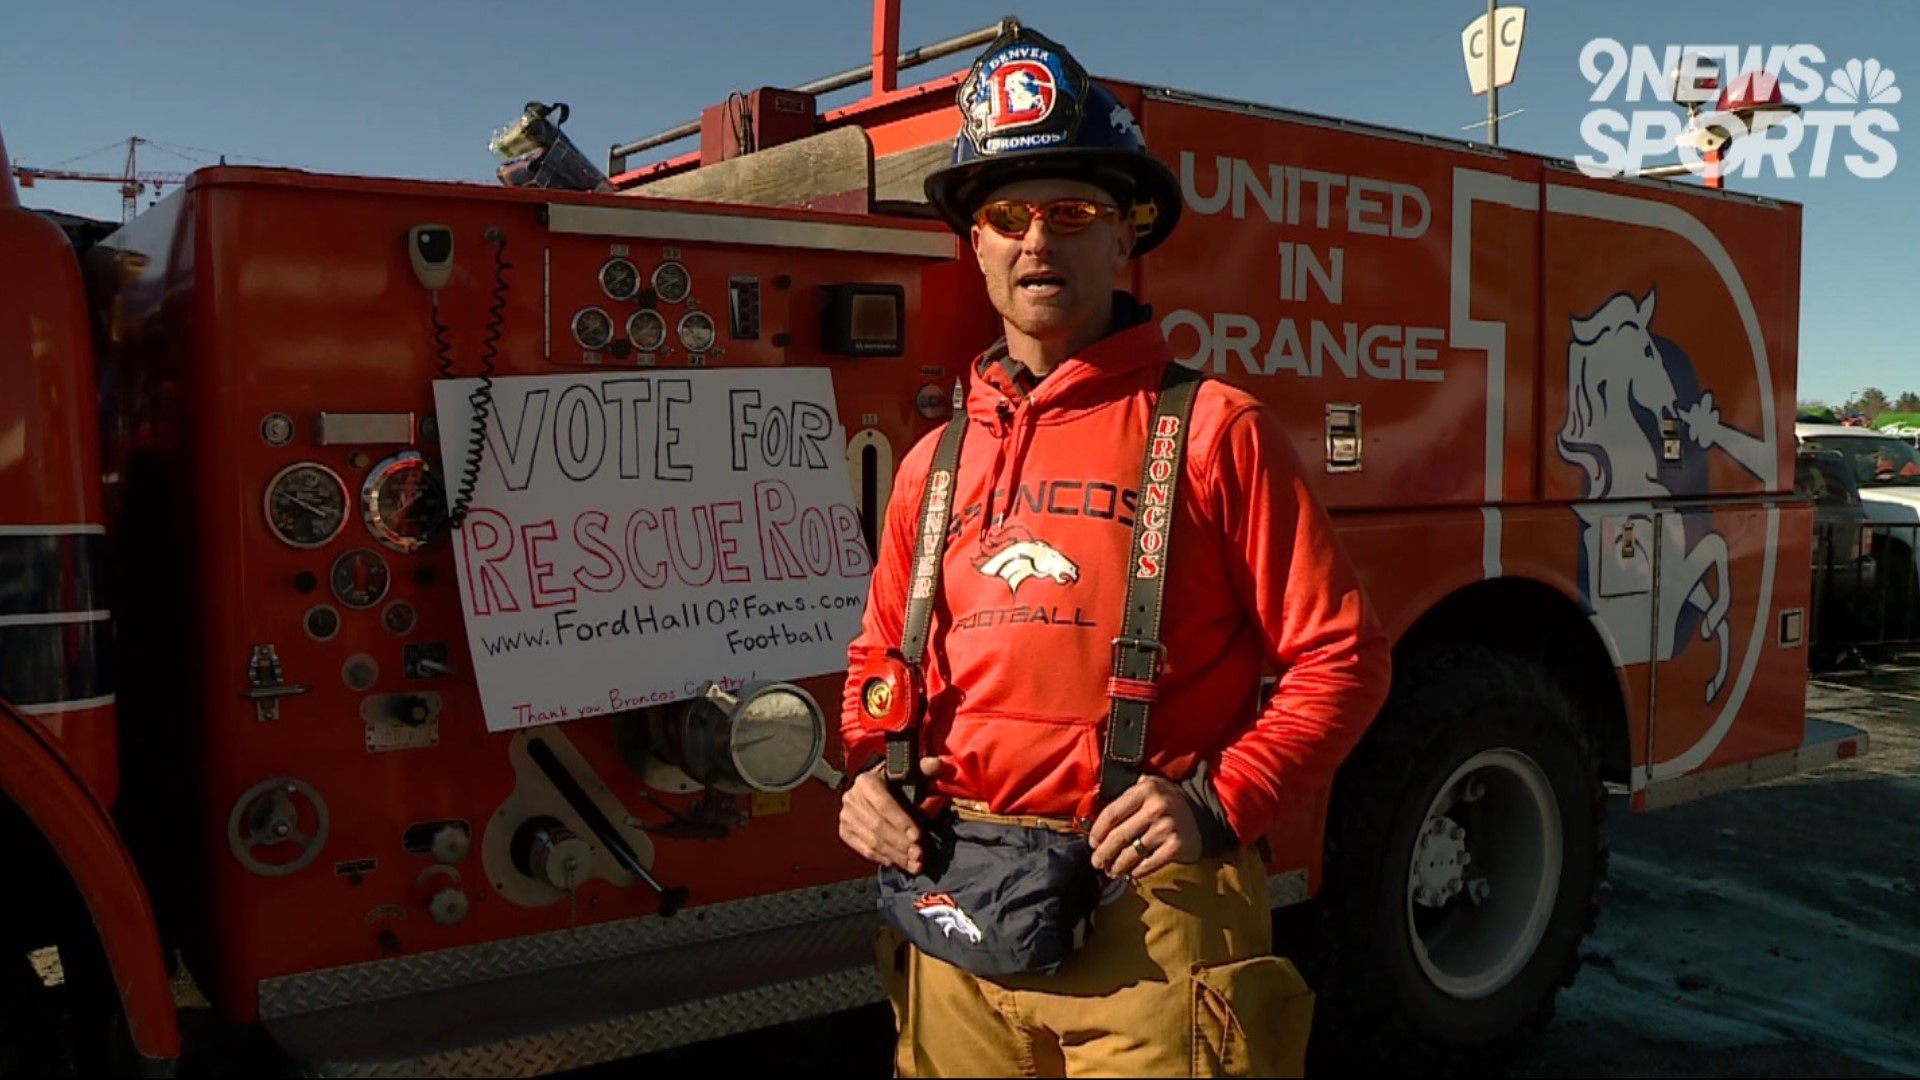 Rob Garner of Poudre Fire Authority has been nominated as a finalist for the Ford Hall of Fans vote for his commitment to his team and community.